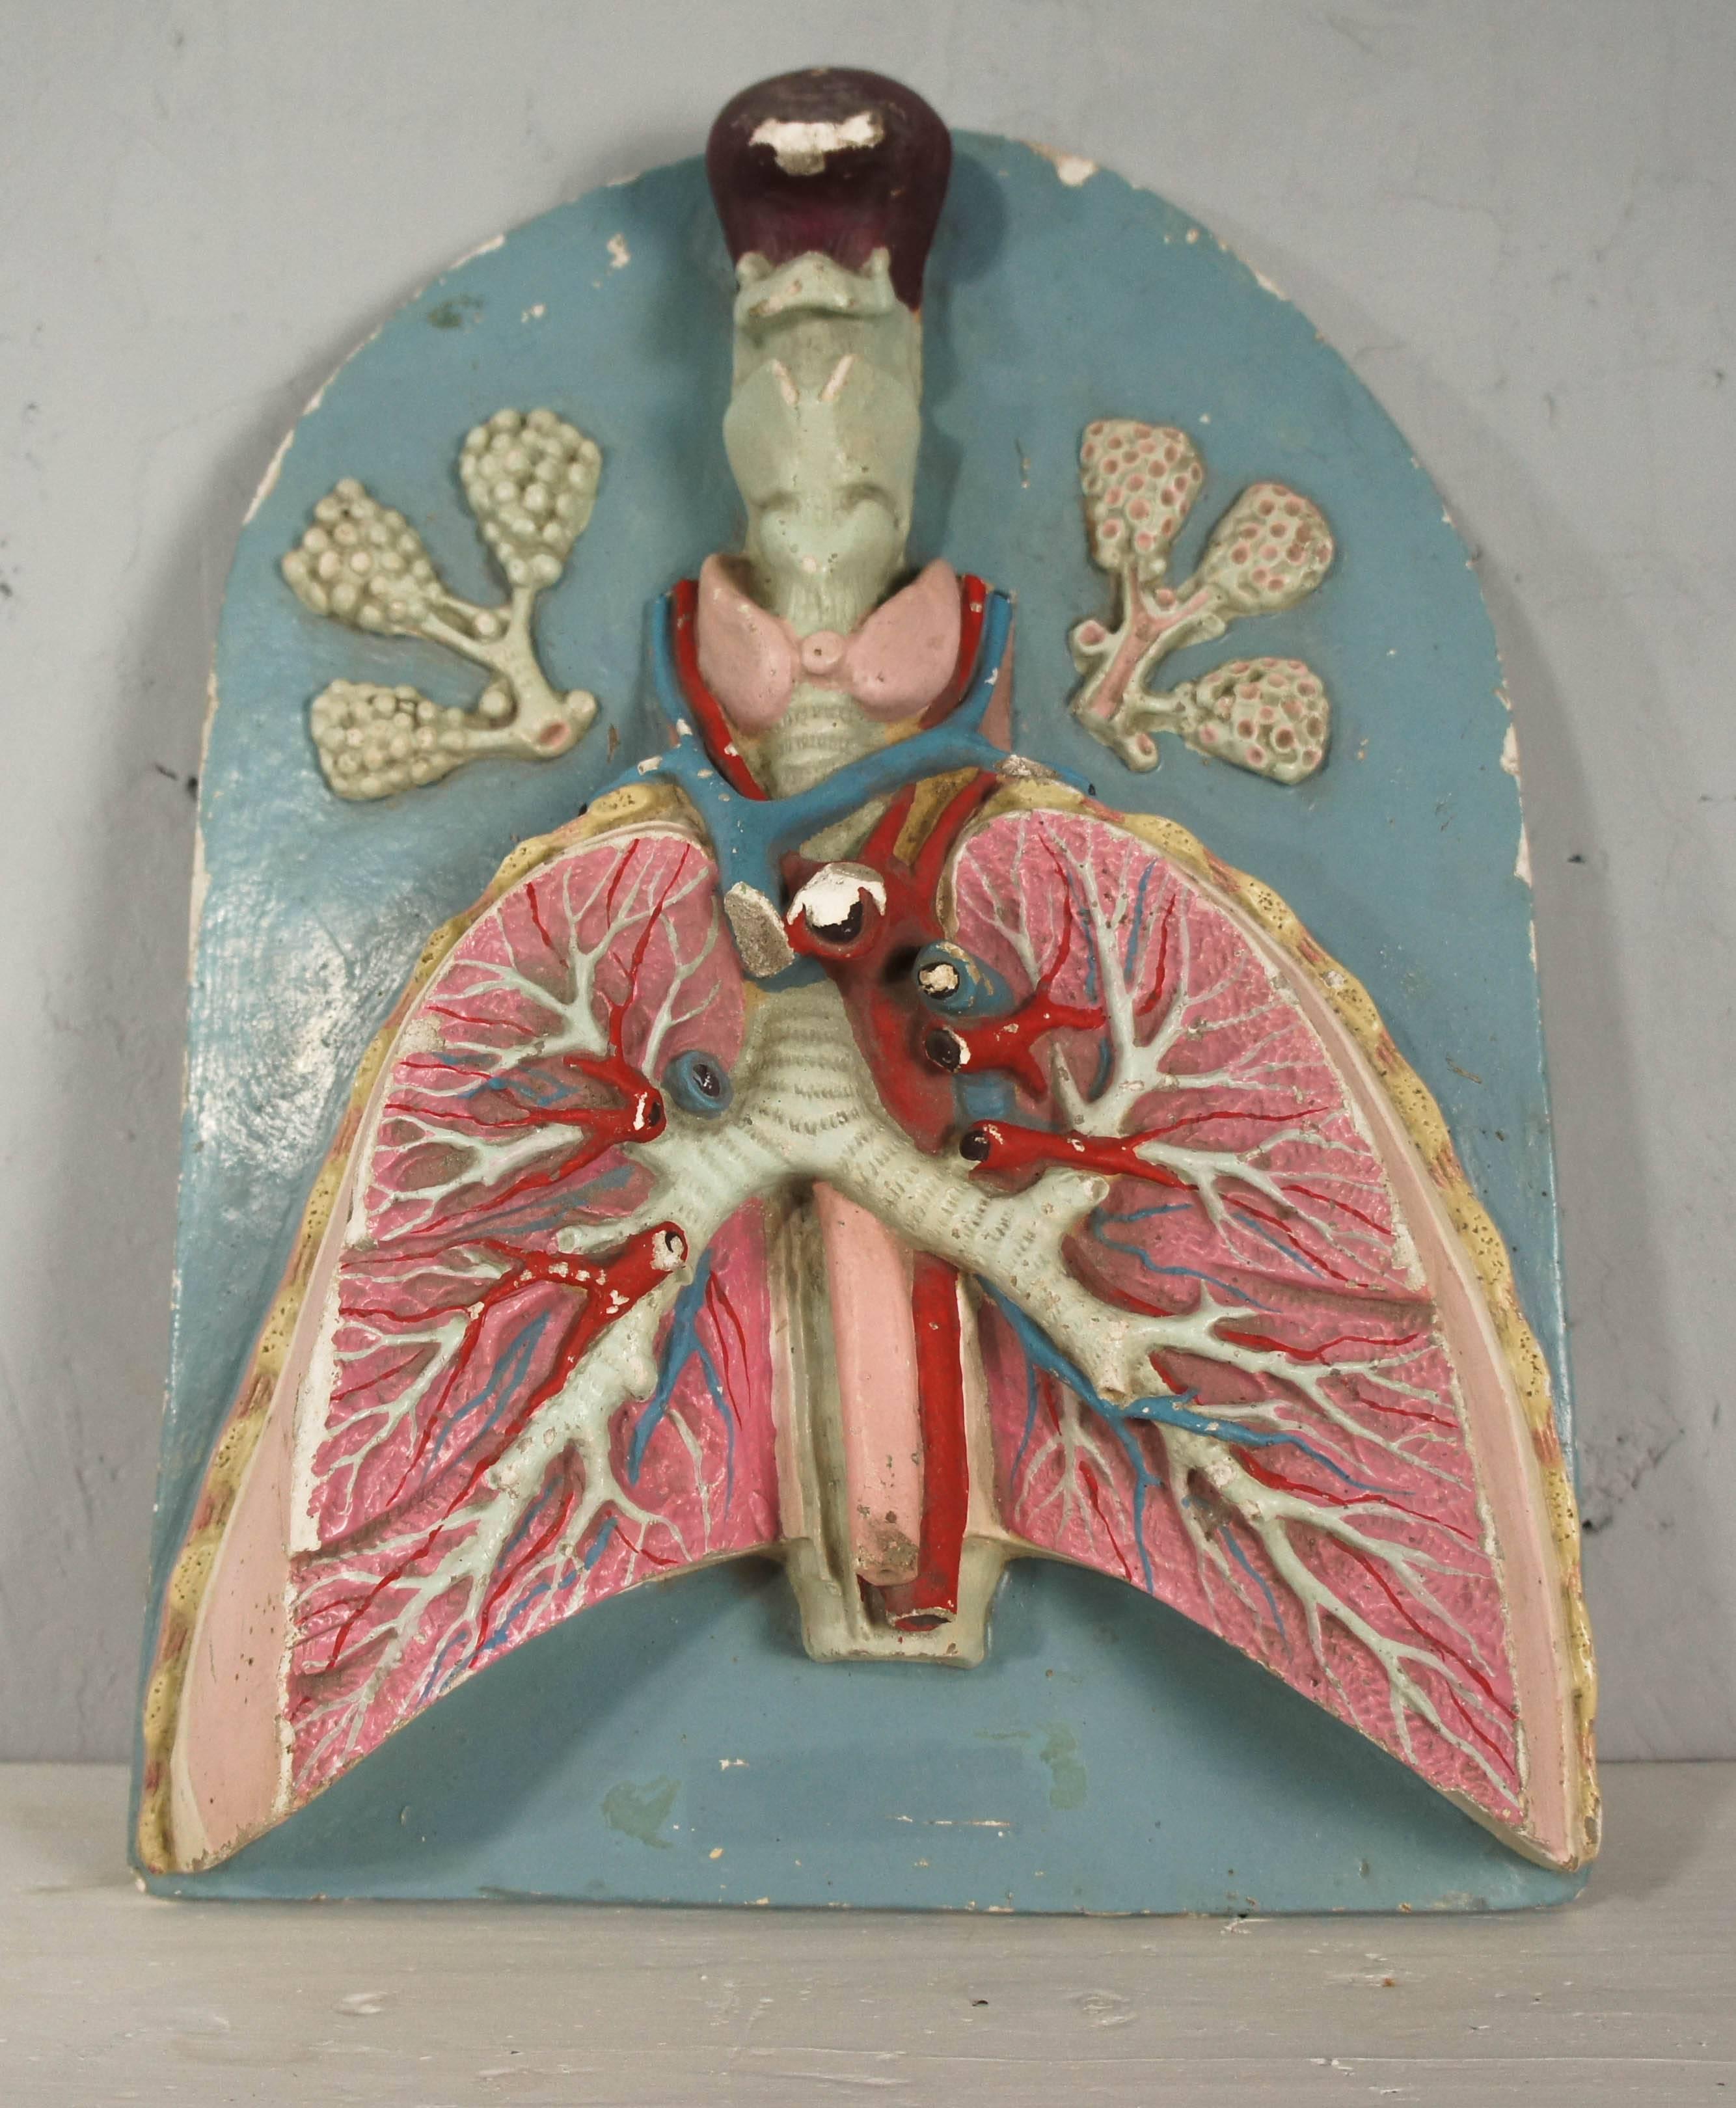 Painted plaster model showing a section of the human lungs. This item was sourced from Sofia University, Bulgaria; and was originally used as a teaching aid. A great decorative item for the home and collector.